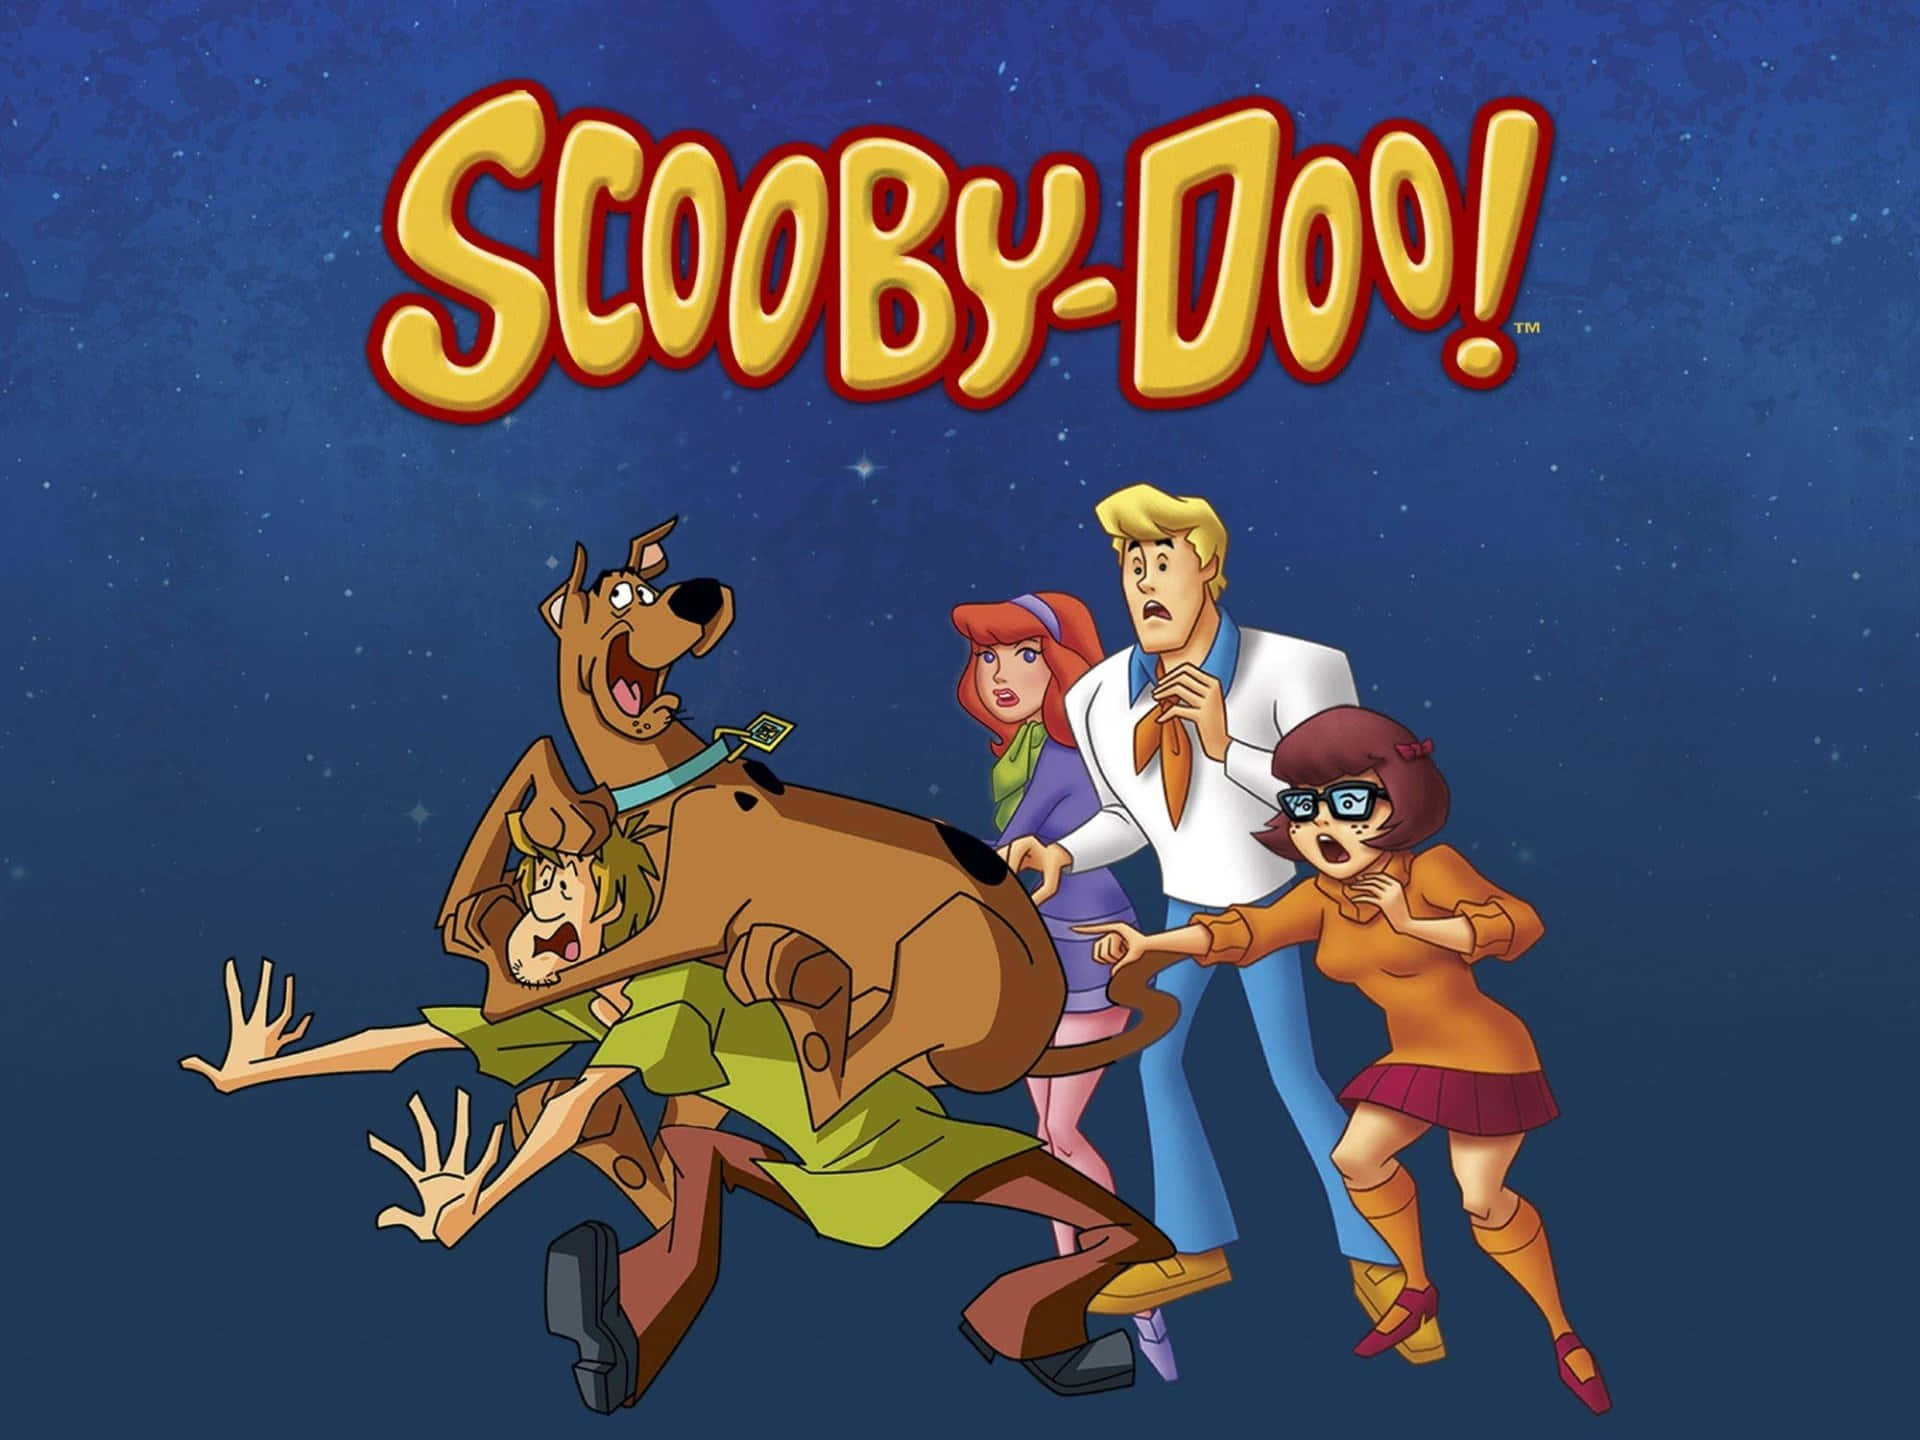 Scooby Doo - The Animated Series